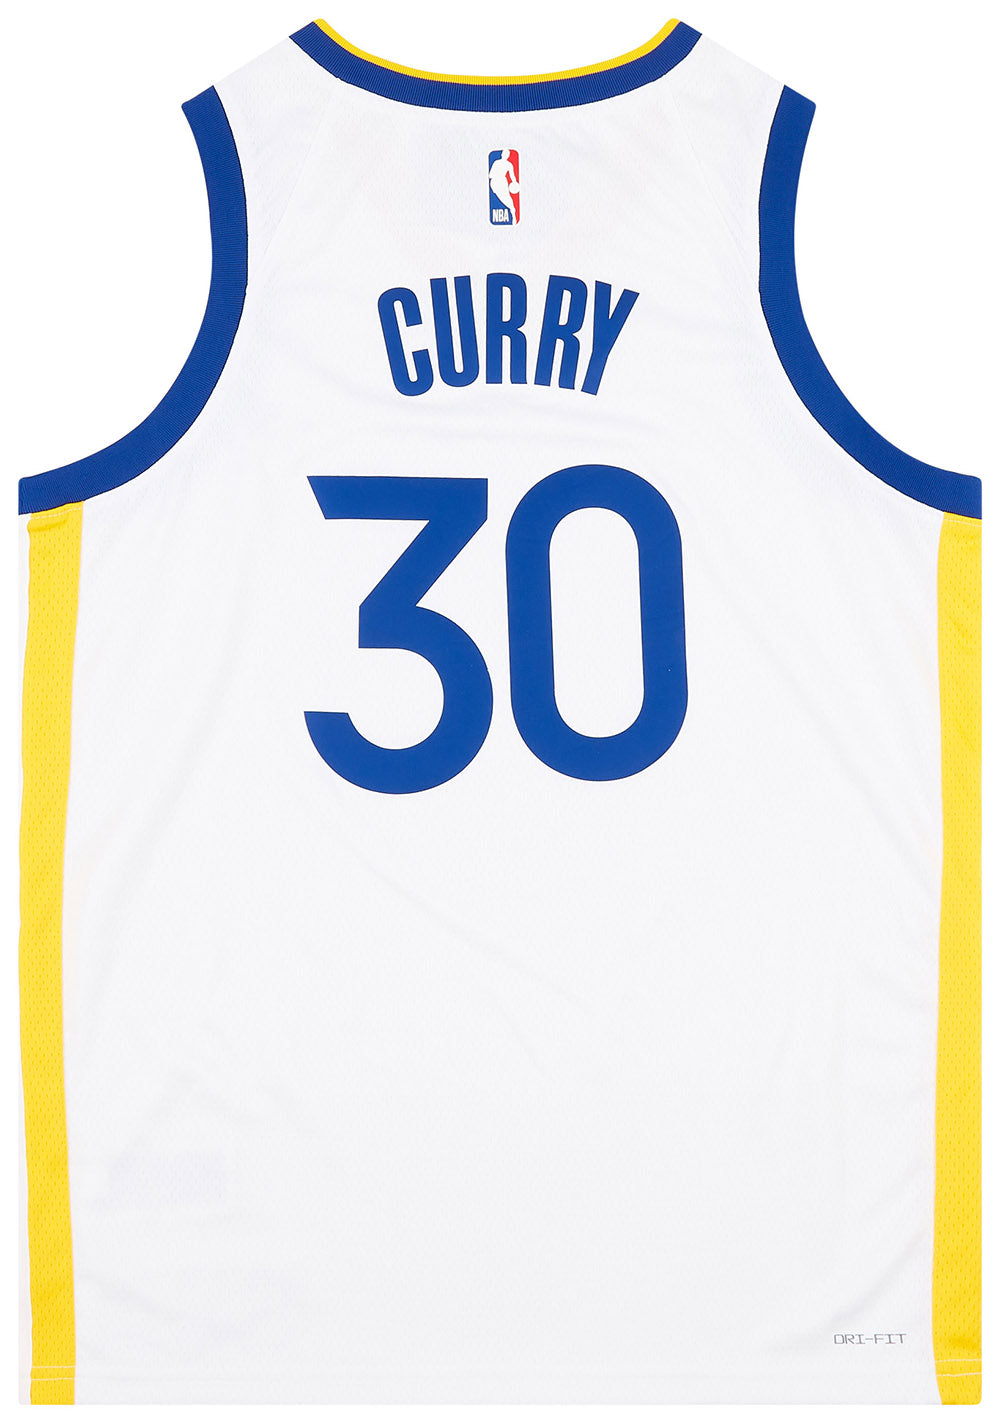 stephen curry's jersey